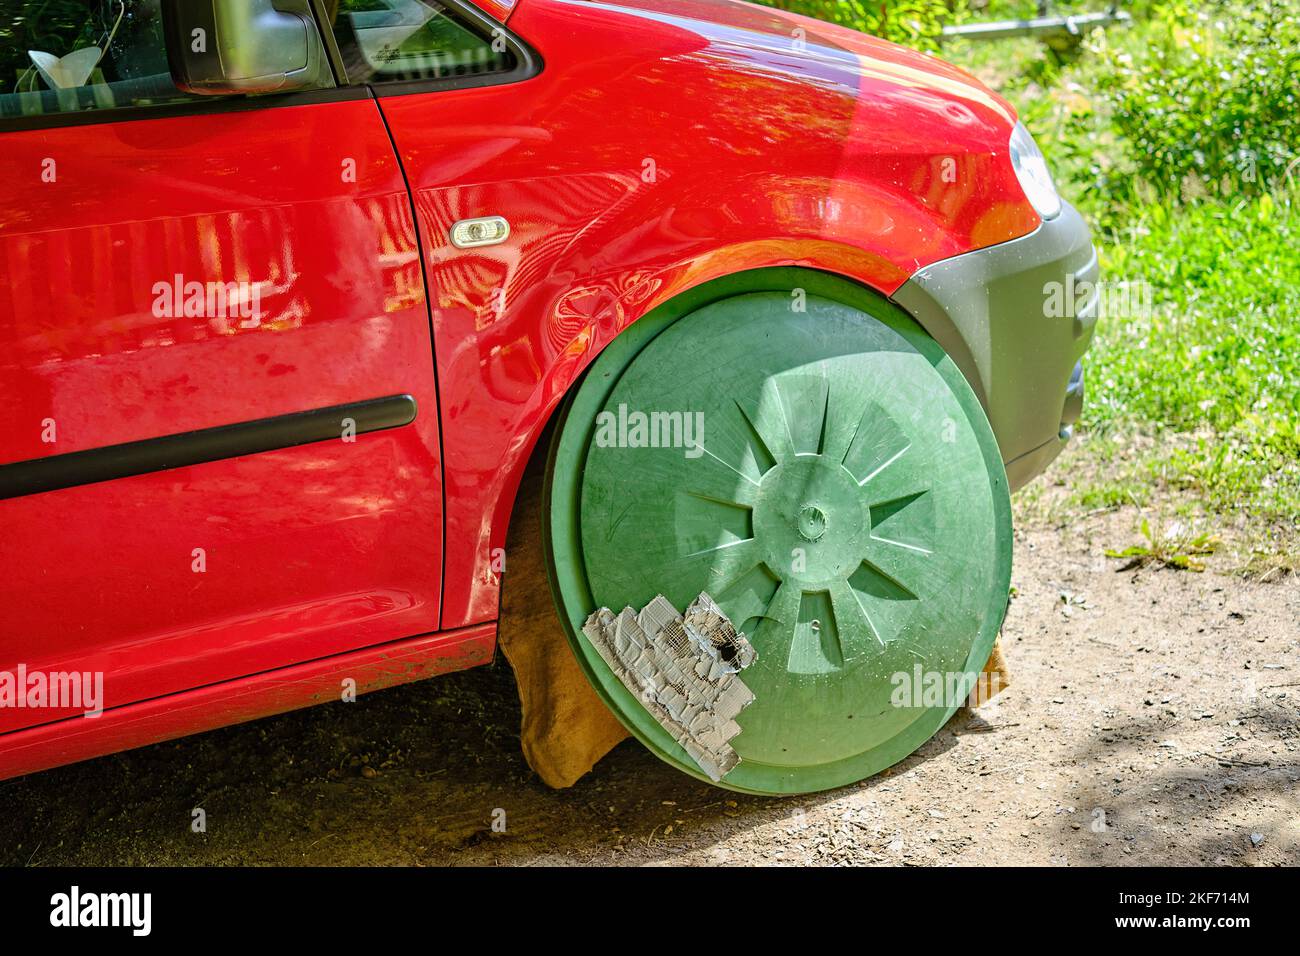 A red car with a green lid of a rain barrel where the right front wheel is supposed to be. Stock Photo